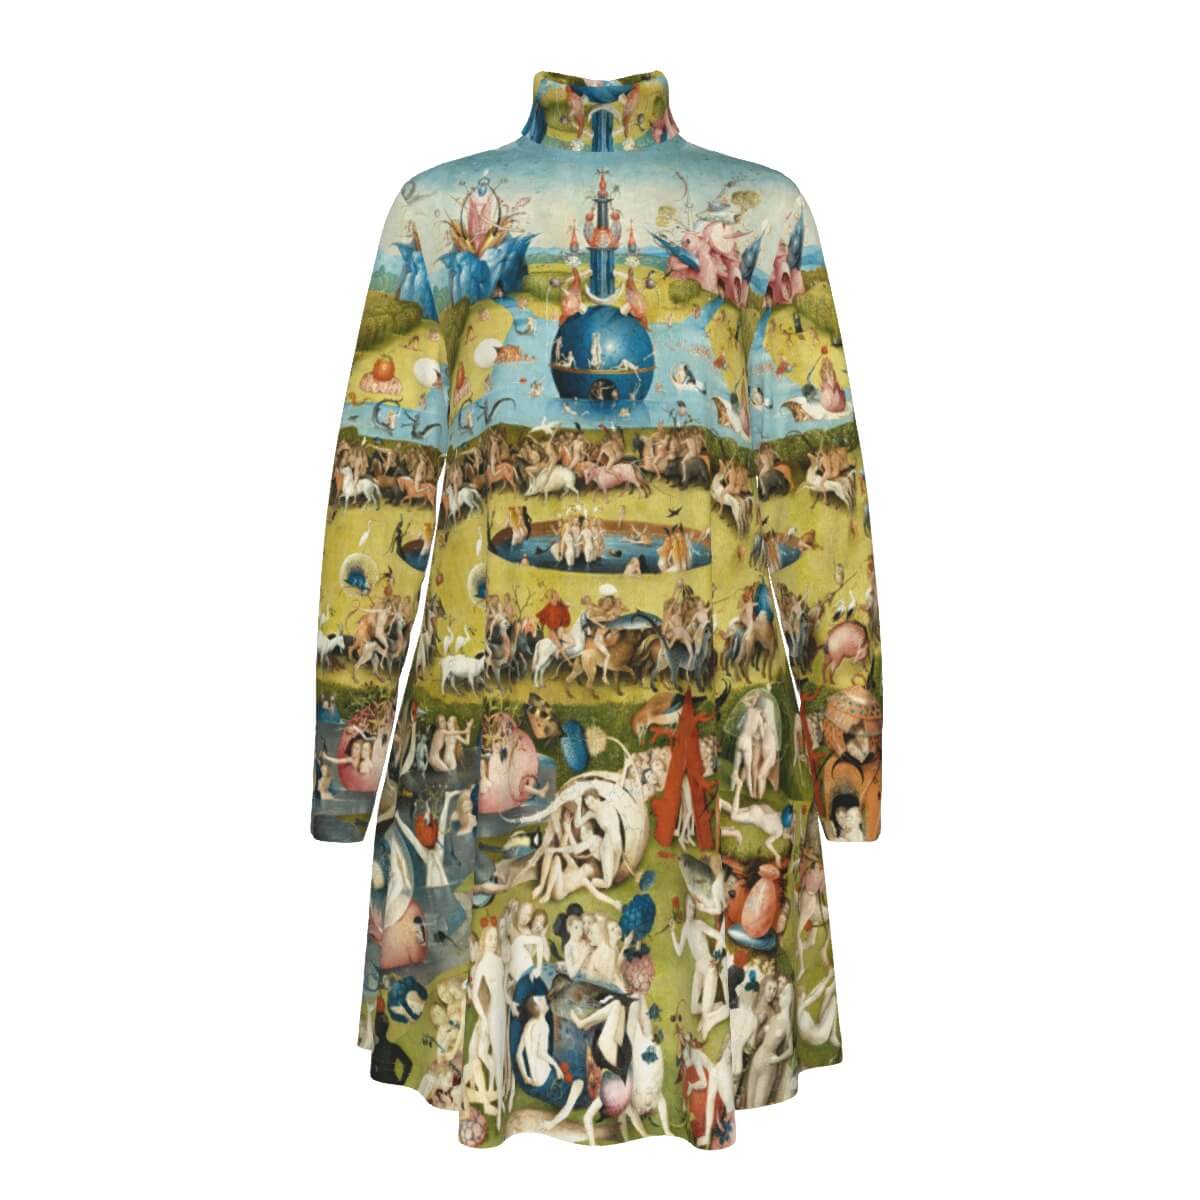 Hieronymus Bosch Earthly Delights High Neck Dress